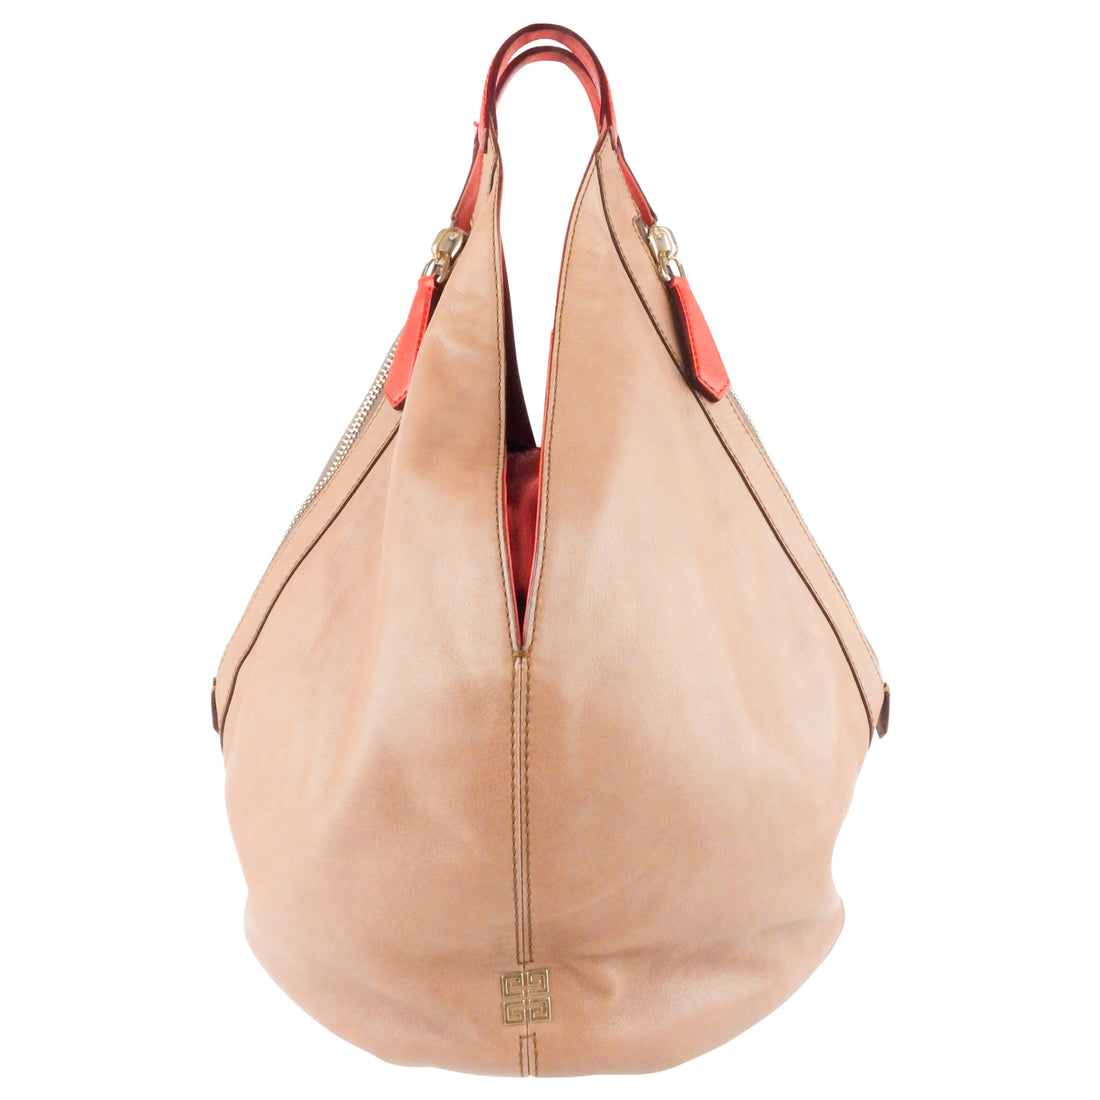 Givenchy Beige and Red Leather Tinhan Hobo Bag